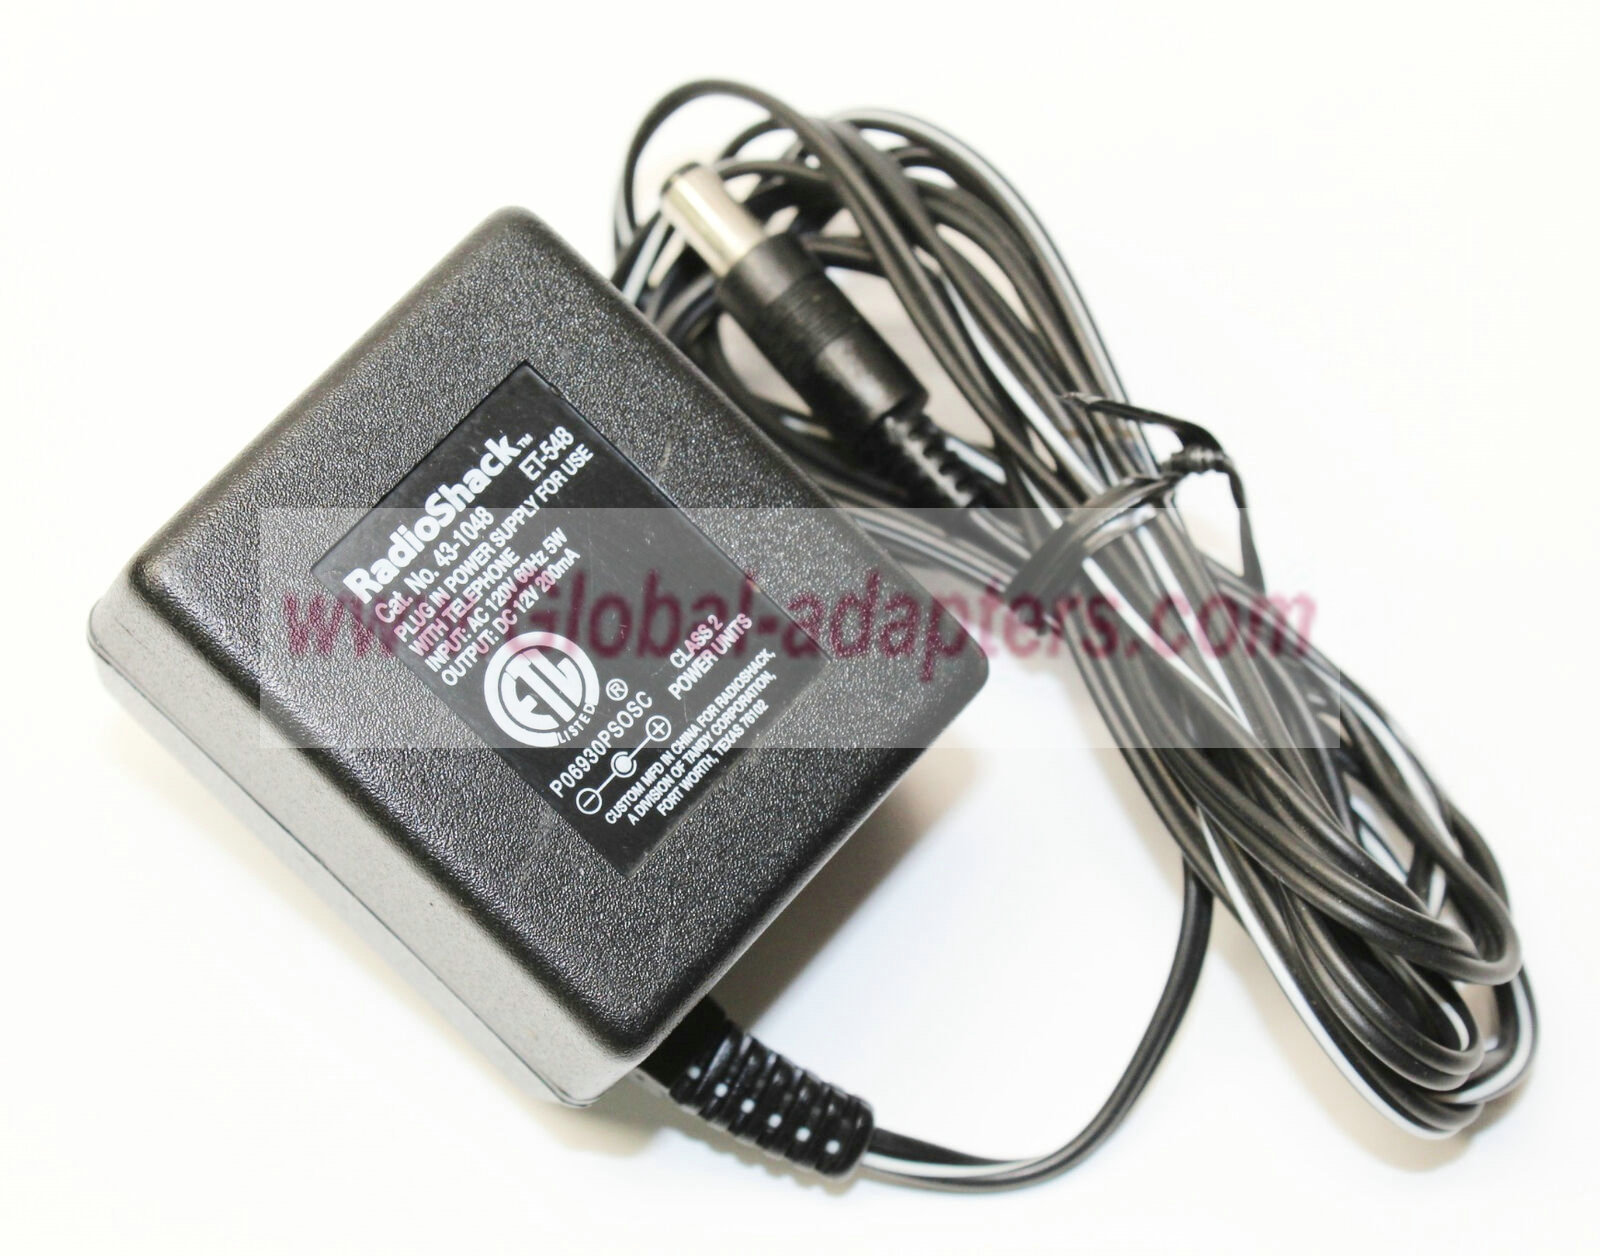 New 12V 200mA 43-1048 Power Supply AC Adapter Charger - Click Image to Close